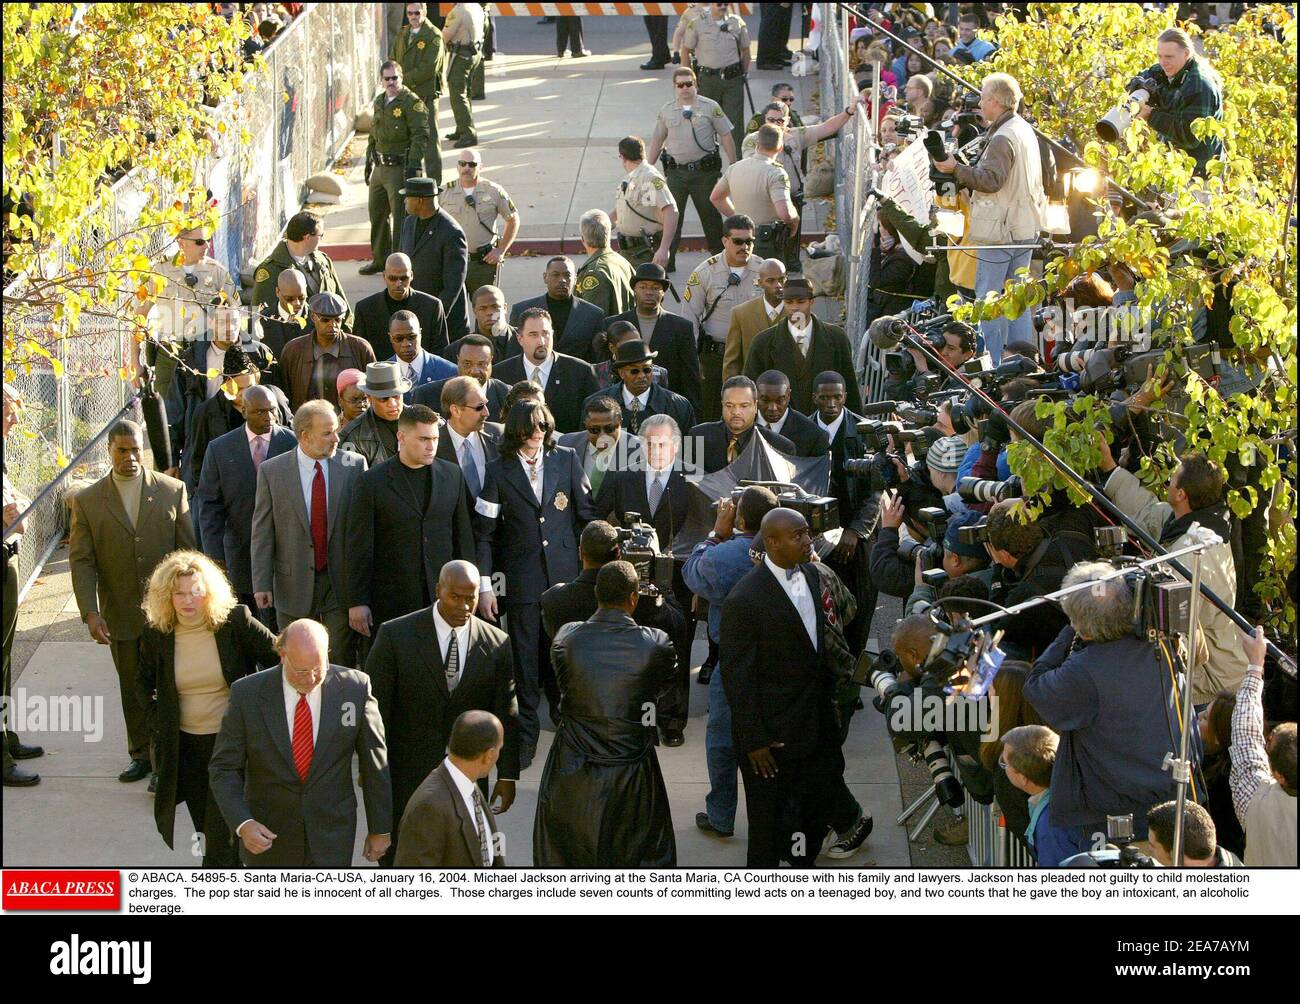 © ABACA. 54895-5. Santa Maria-CA-USA, January 16, 2004. Michael Jackson arriving at the Santa Maria, CA Courthouse with his family and lawyers. Jackson has pleaded not guilty to child molestation charges. The pop star said he is innocent of all charges. Those charges include seven counts of committing lewd acts on a teenaged boy, and two counts that he gave the boy an intoxicant, an alcoholic beverage. Stock Photo